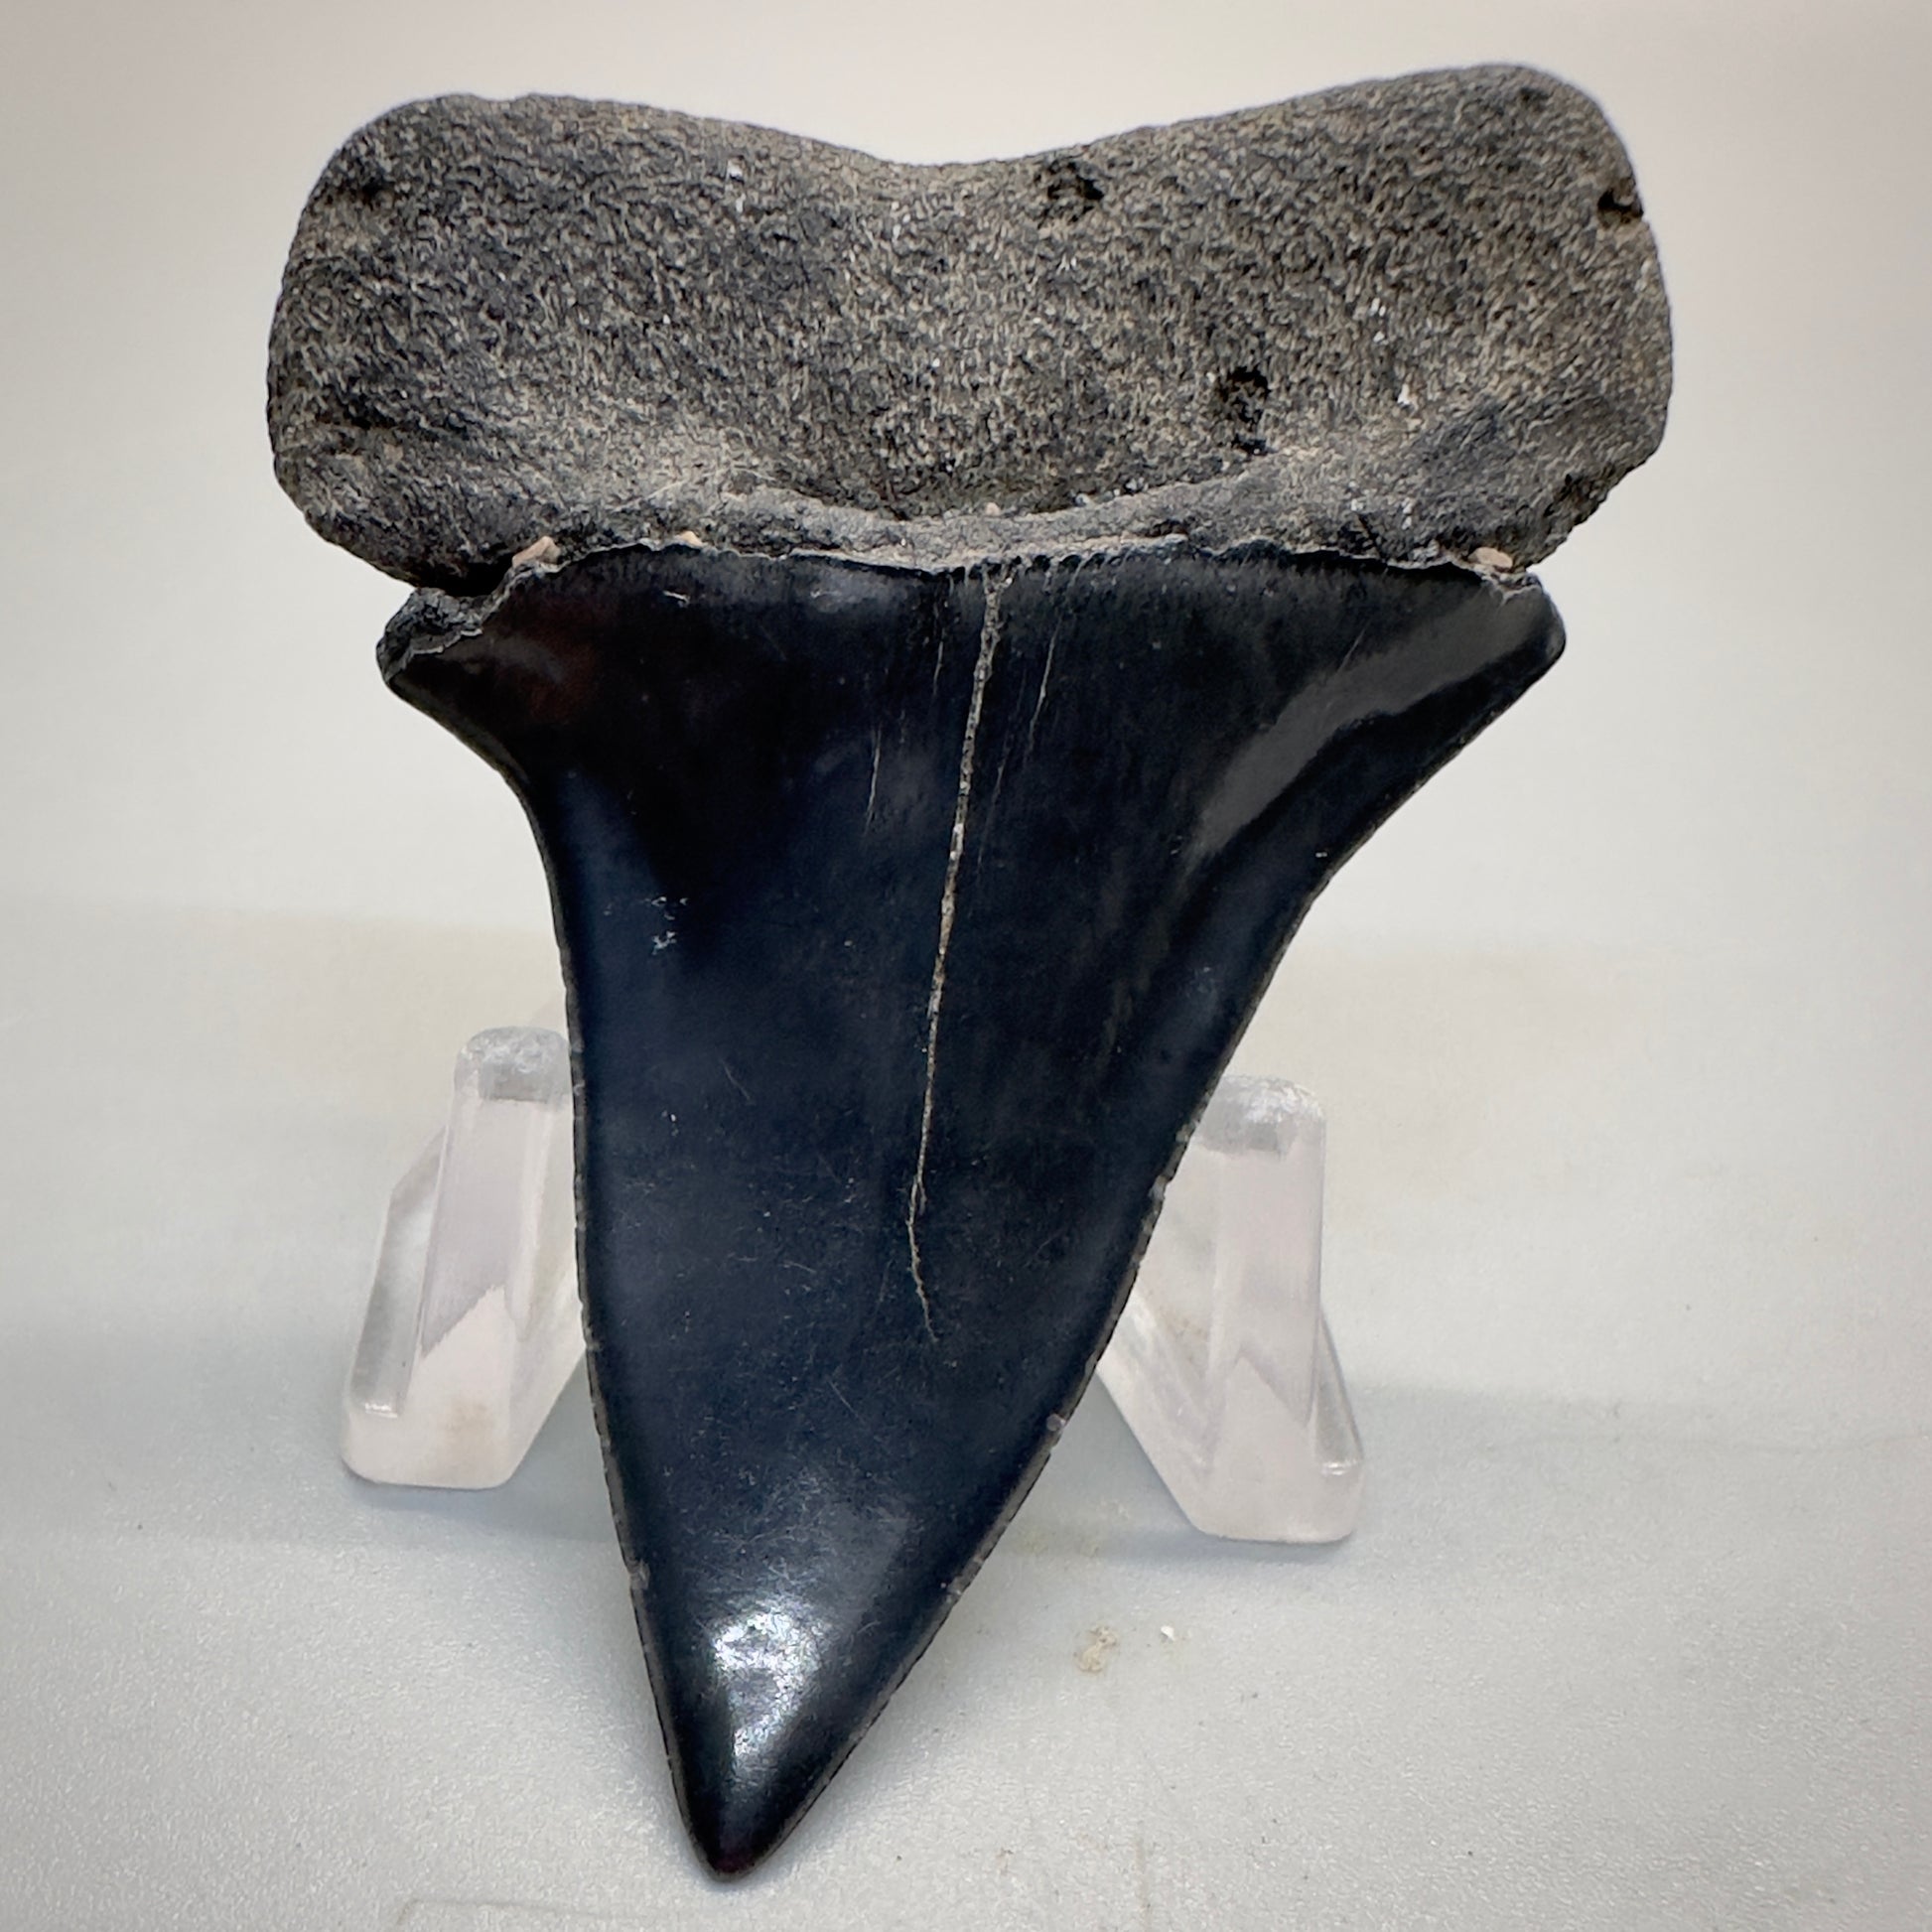 Dark colors 2.50 inches Extinct Mako - isurus hastalis shark tooth from southeast, USA M515 back down